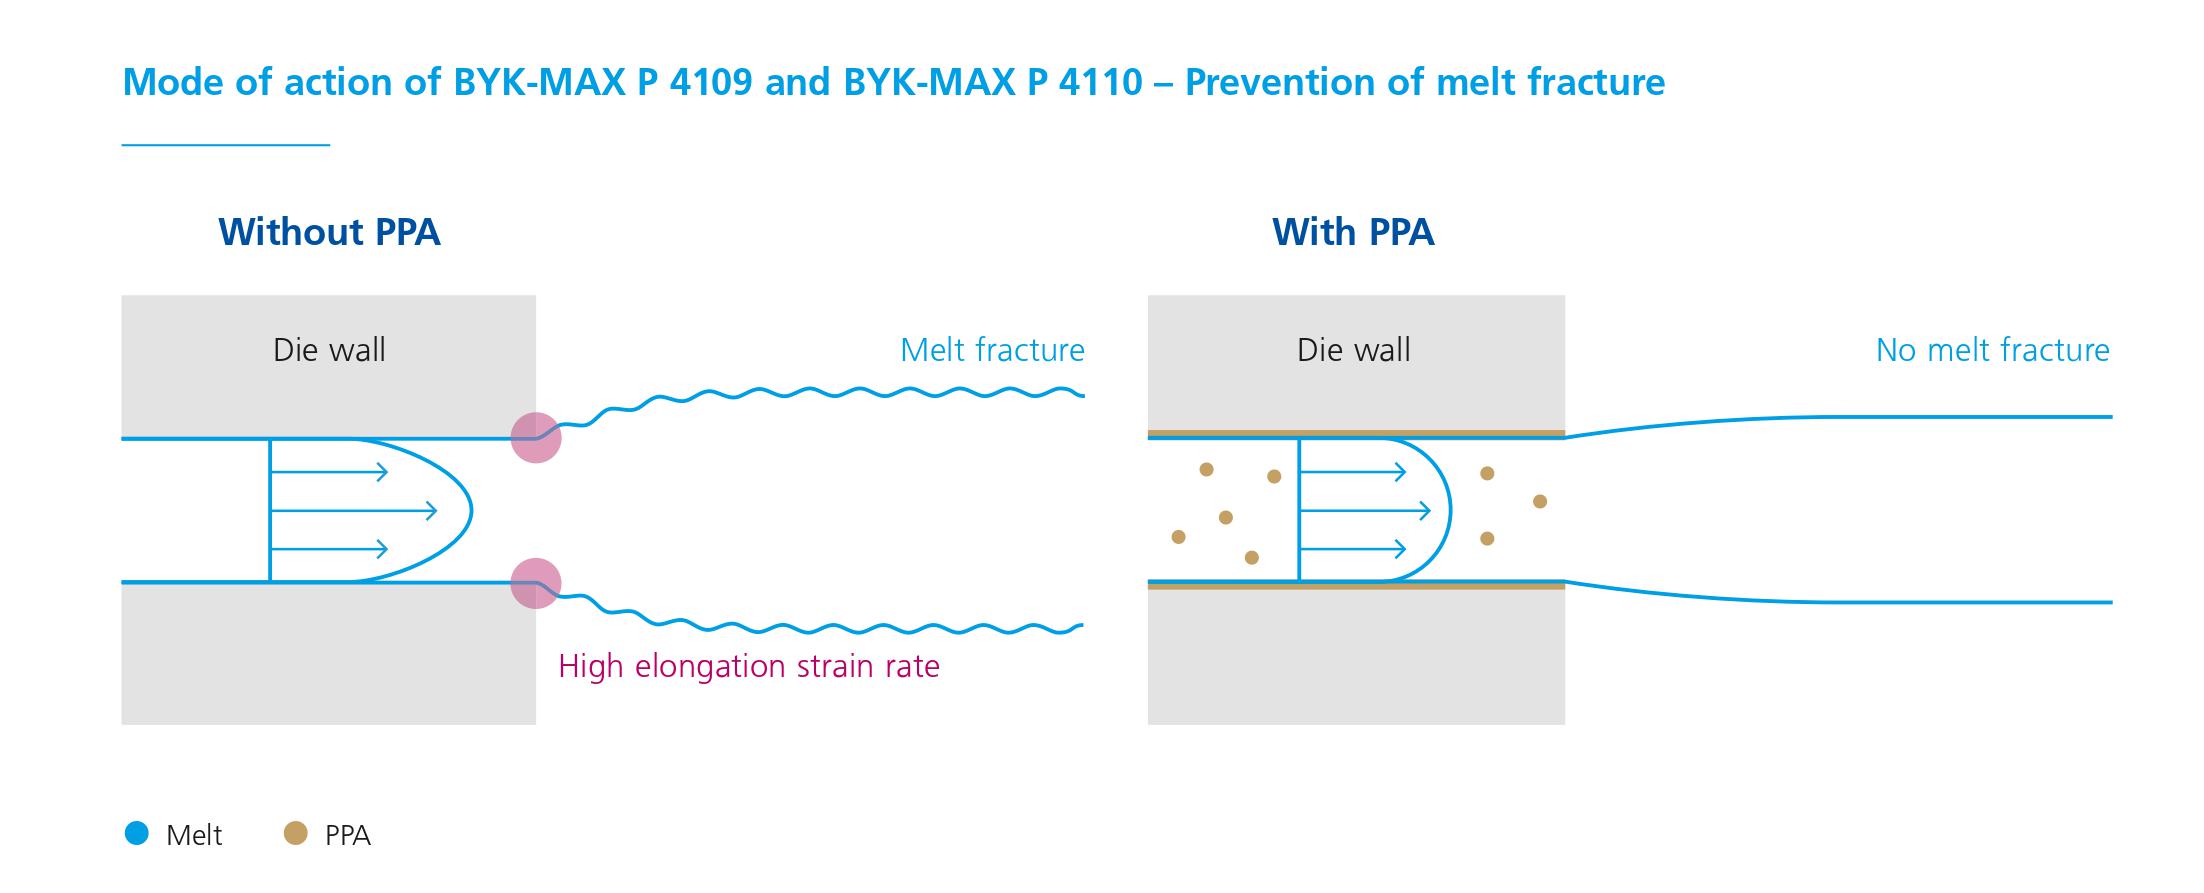 [Translate to Korean:] Mode of action of BYK-MAX P 4109 and P 4110